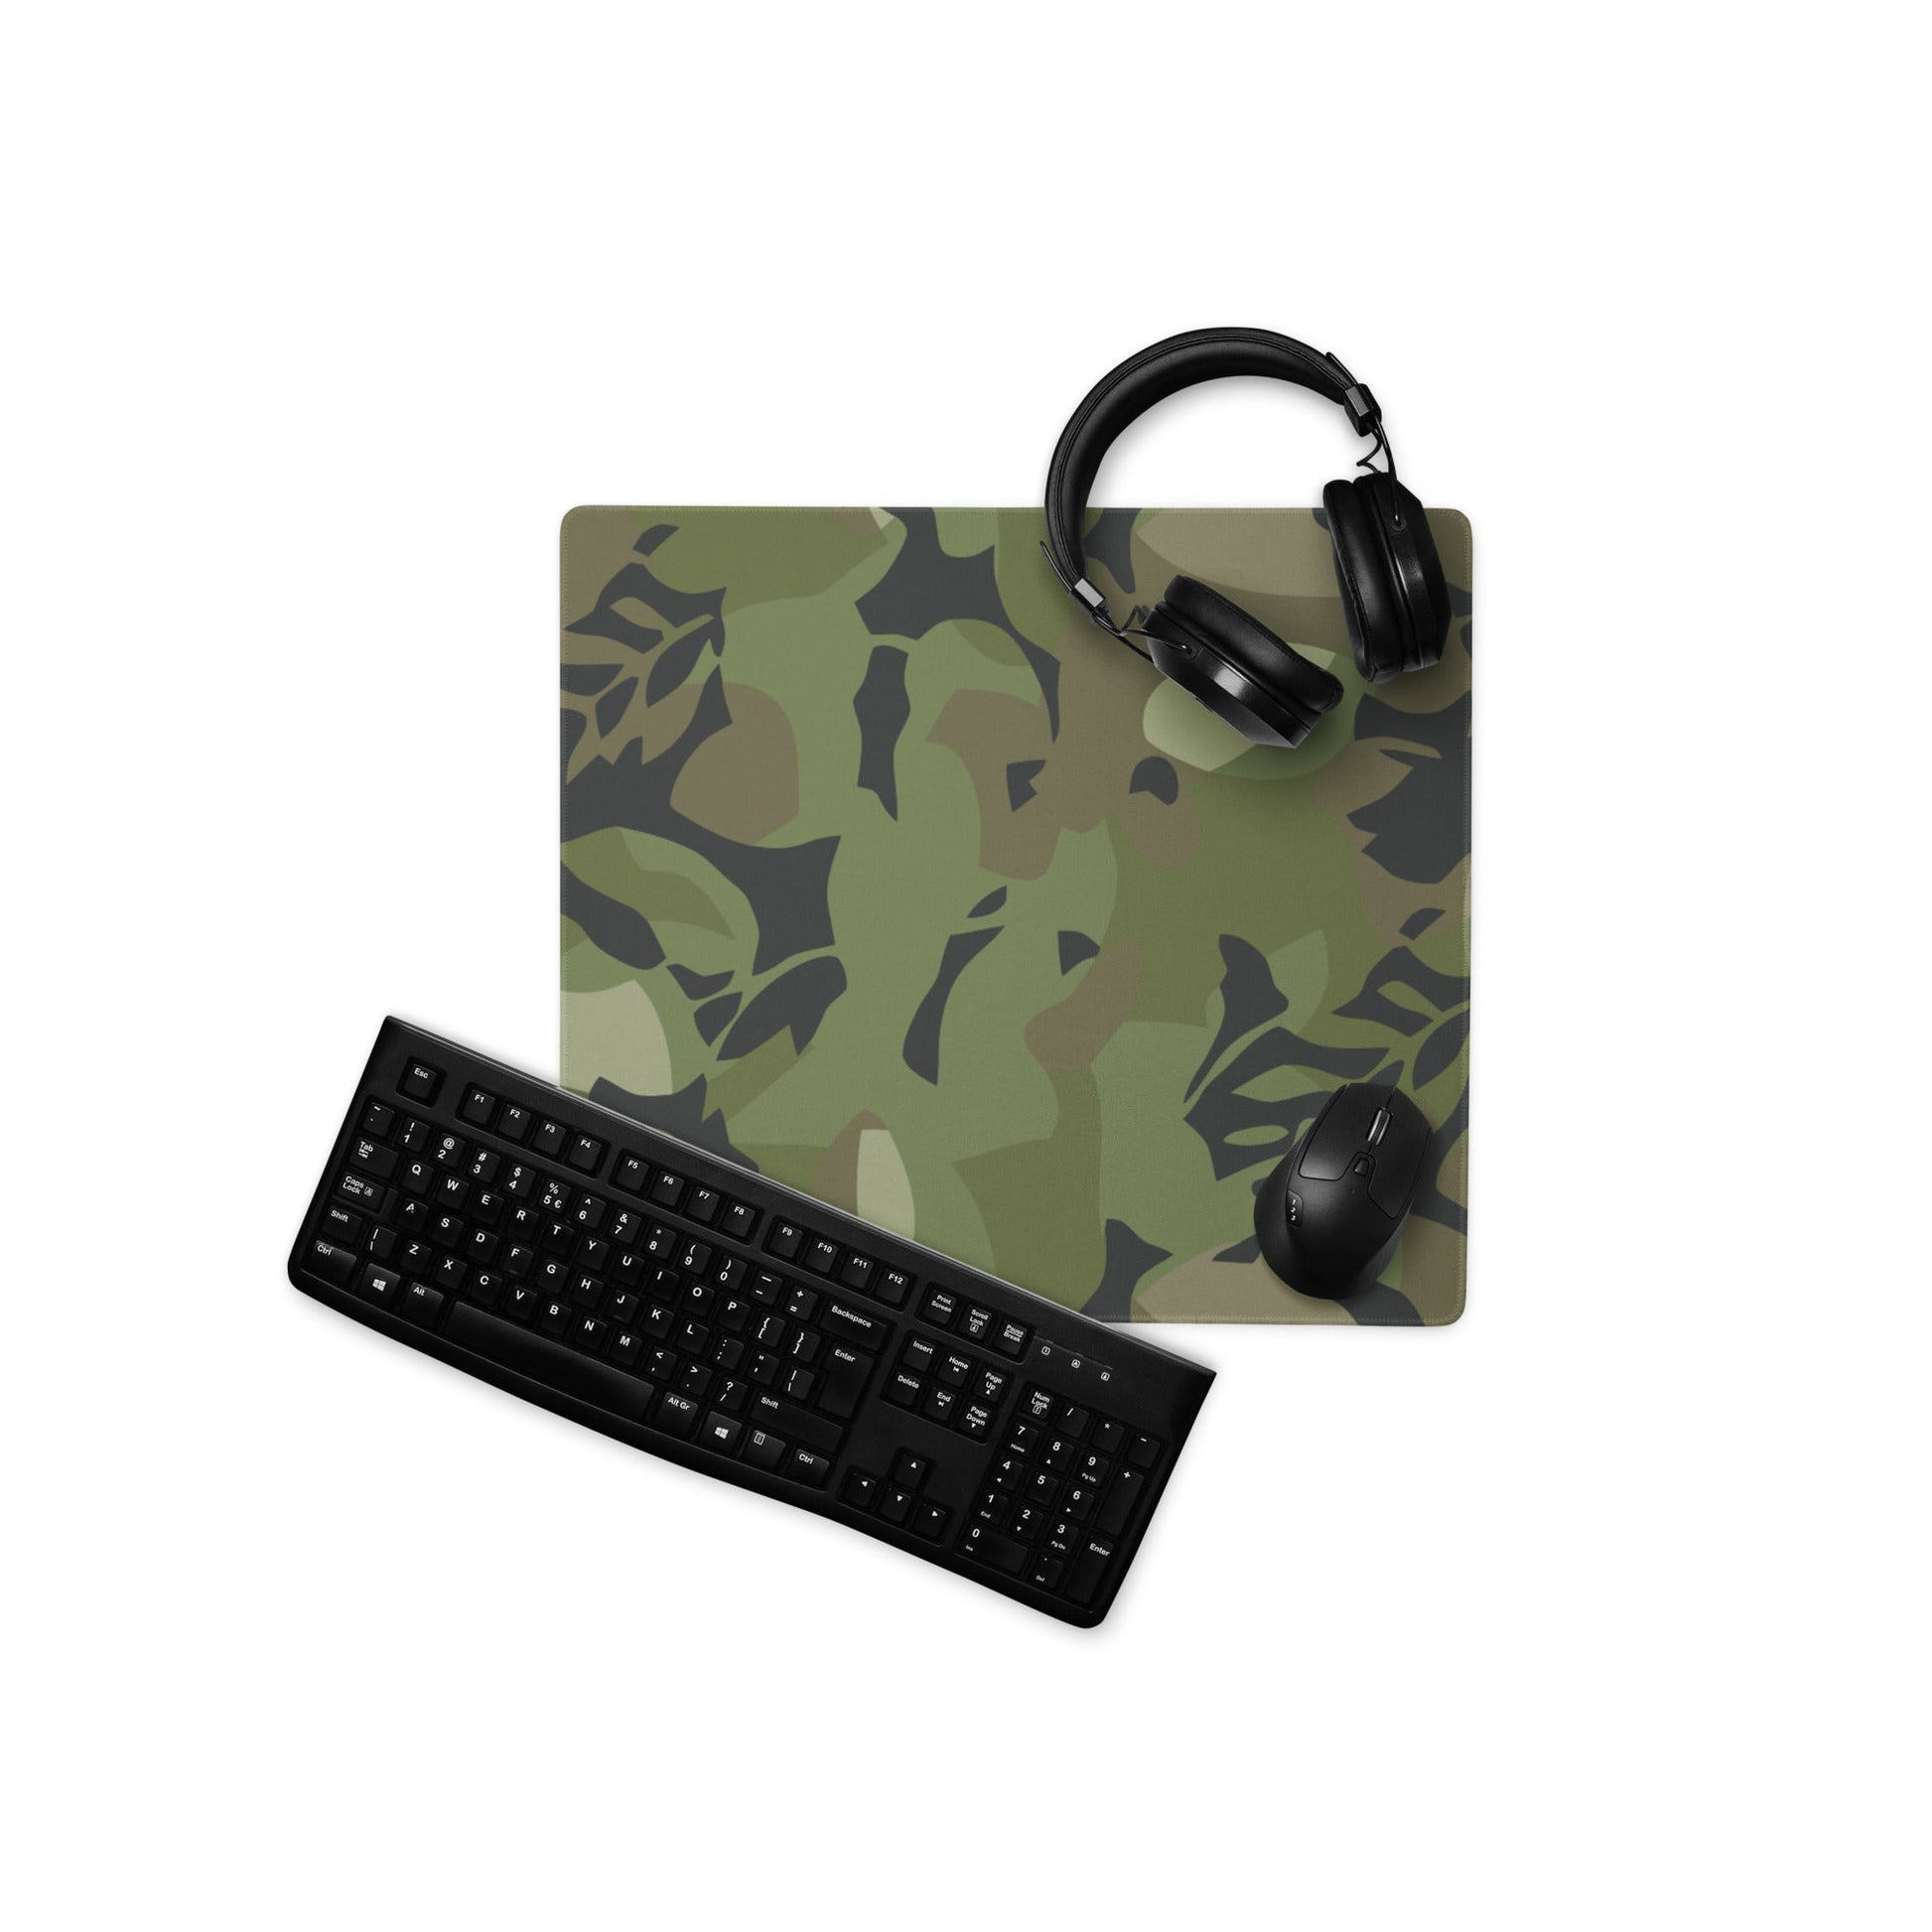 Cuban Special Troops Elm Leaf CAMO Gaming mouse pad - 18″×16″